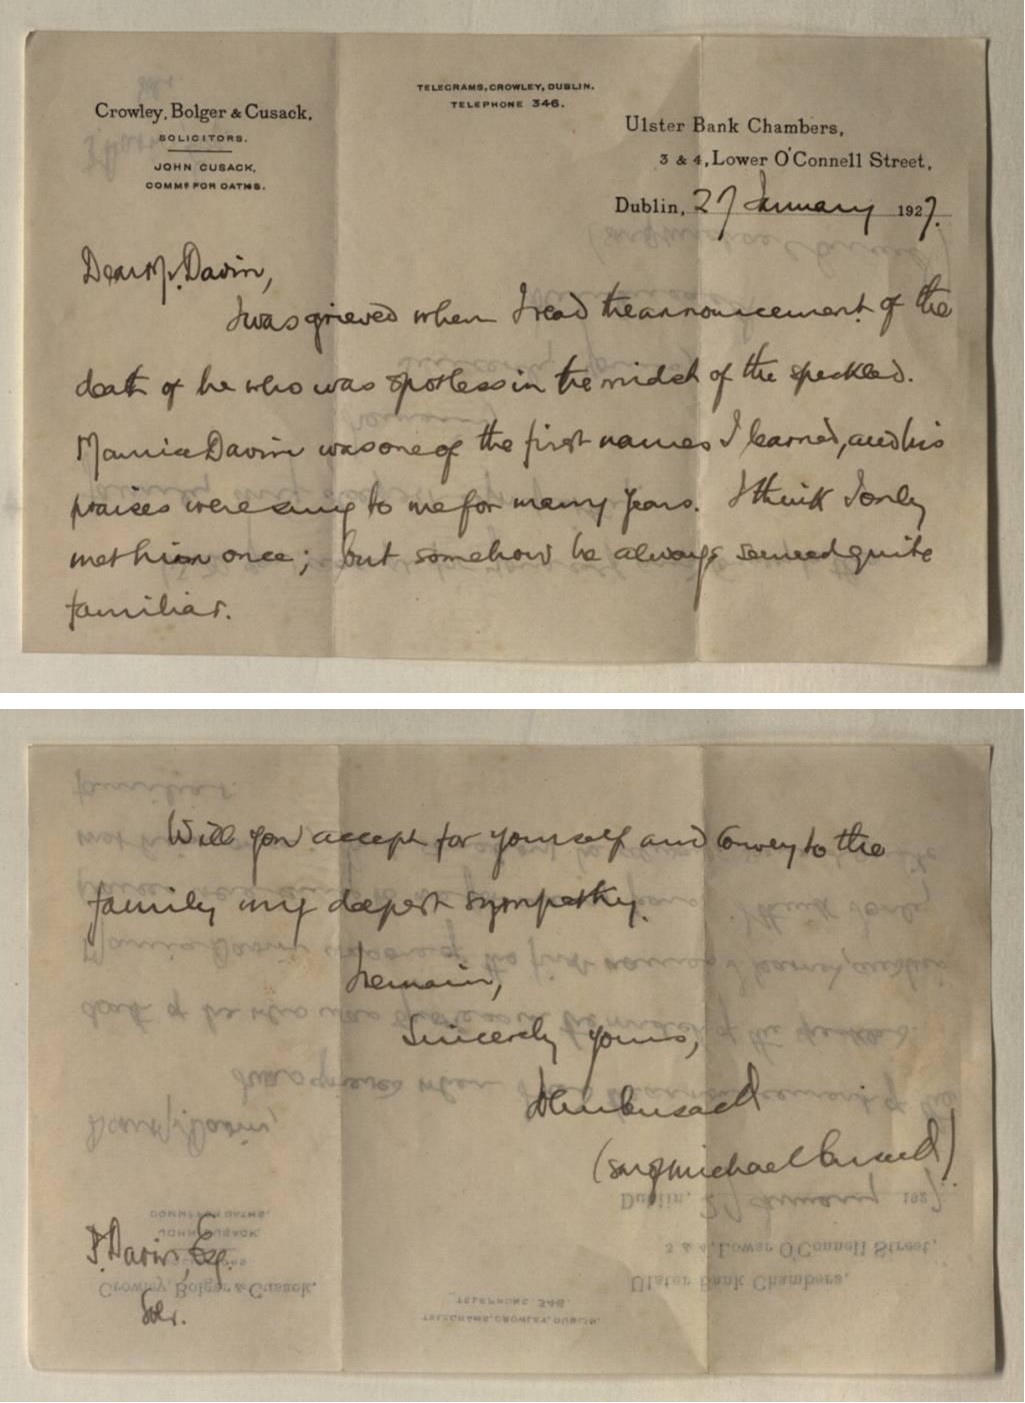 Letter written by the son of Michael Cusack, sympathising with the Davin family on the death of Michael Davin, 1927.